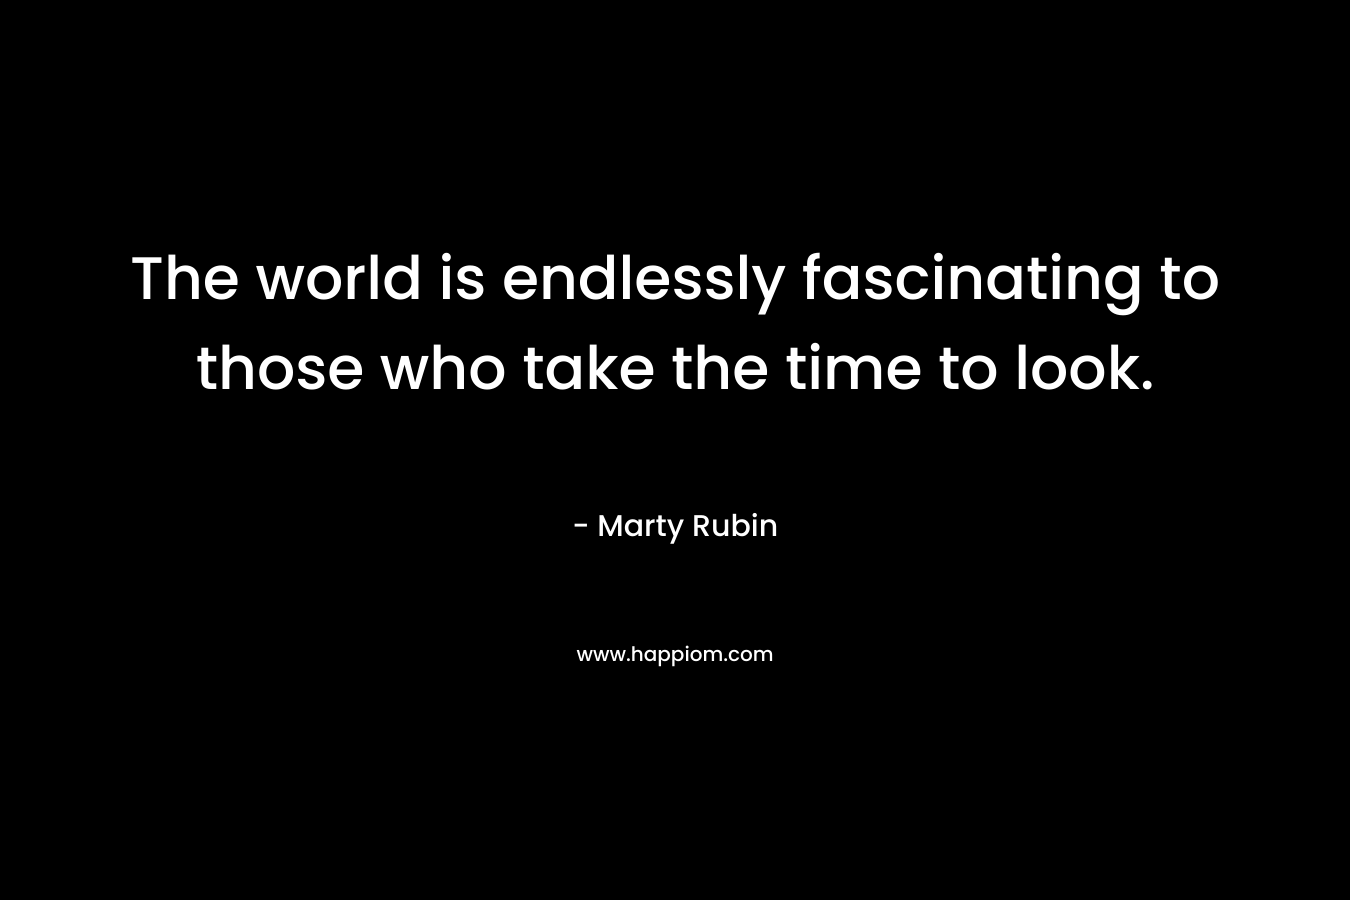 The world is endlessly fascinating to those who take the time to look. – Marty Rubin